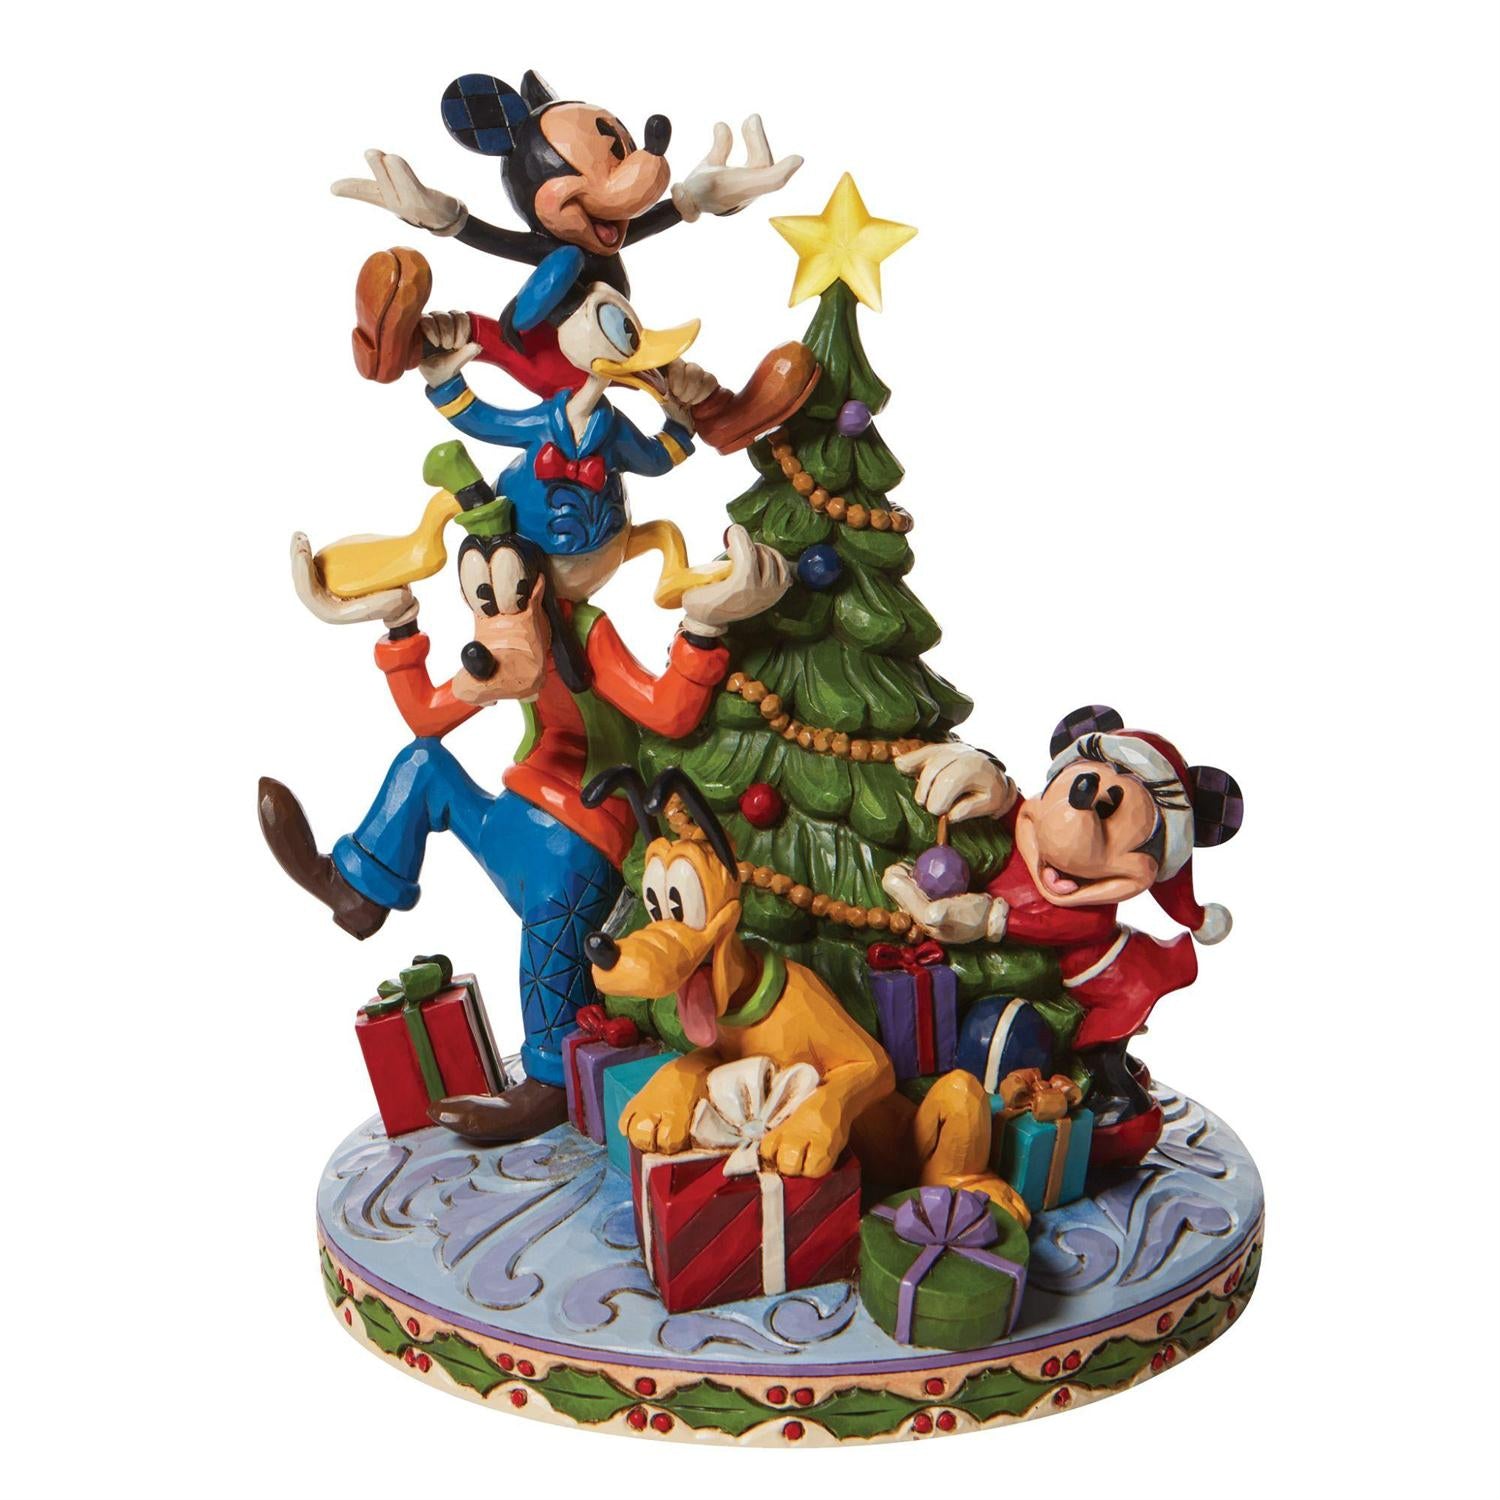 friends form a teetering tower to hoist him to the top of the Mouse family tree - side view